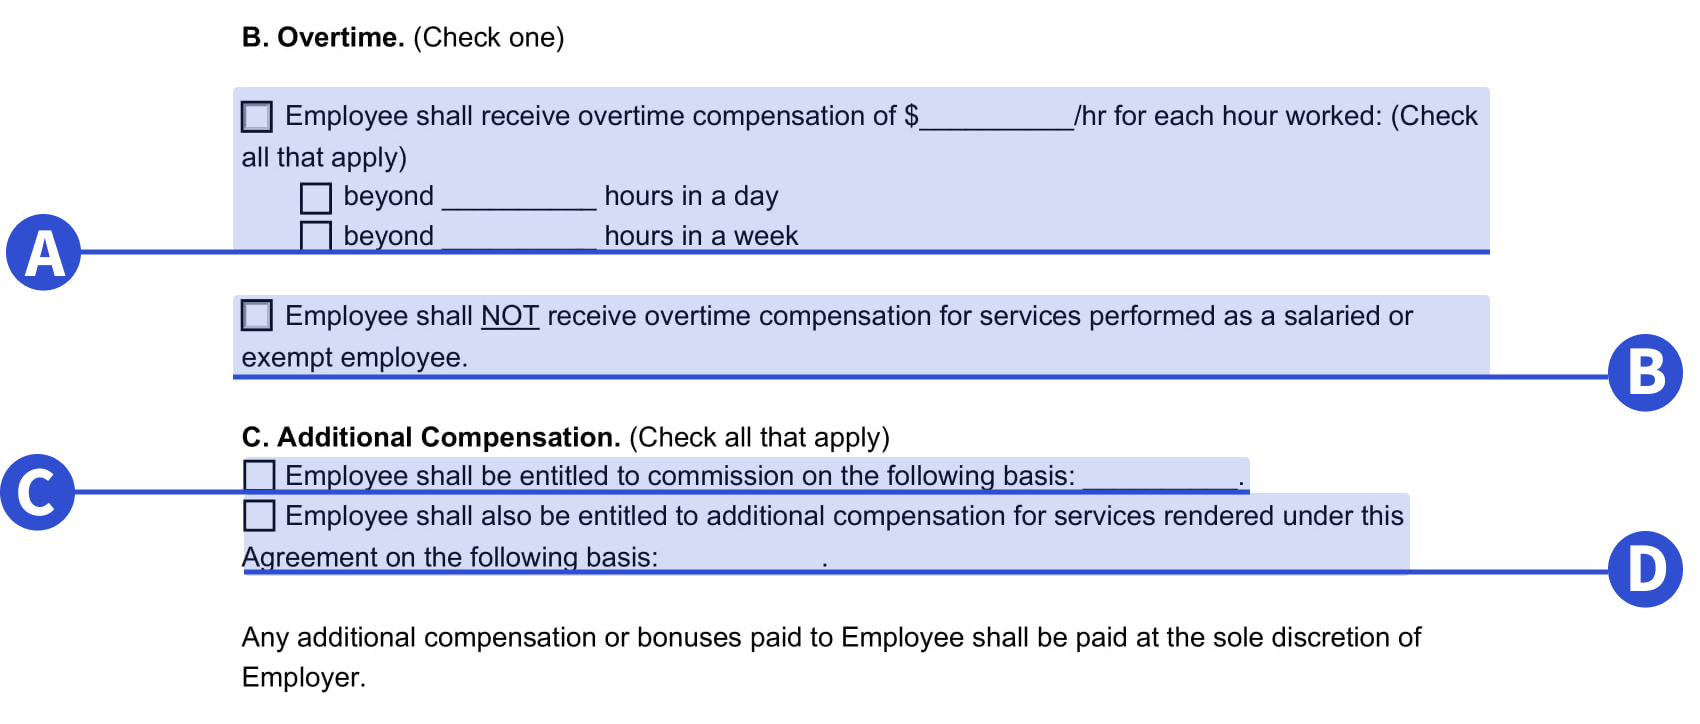 employment contract overtime and additional compensation